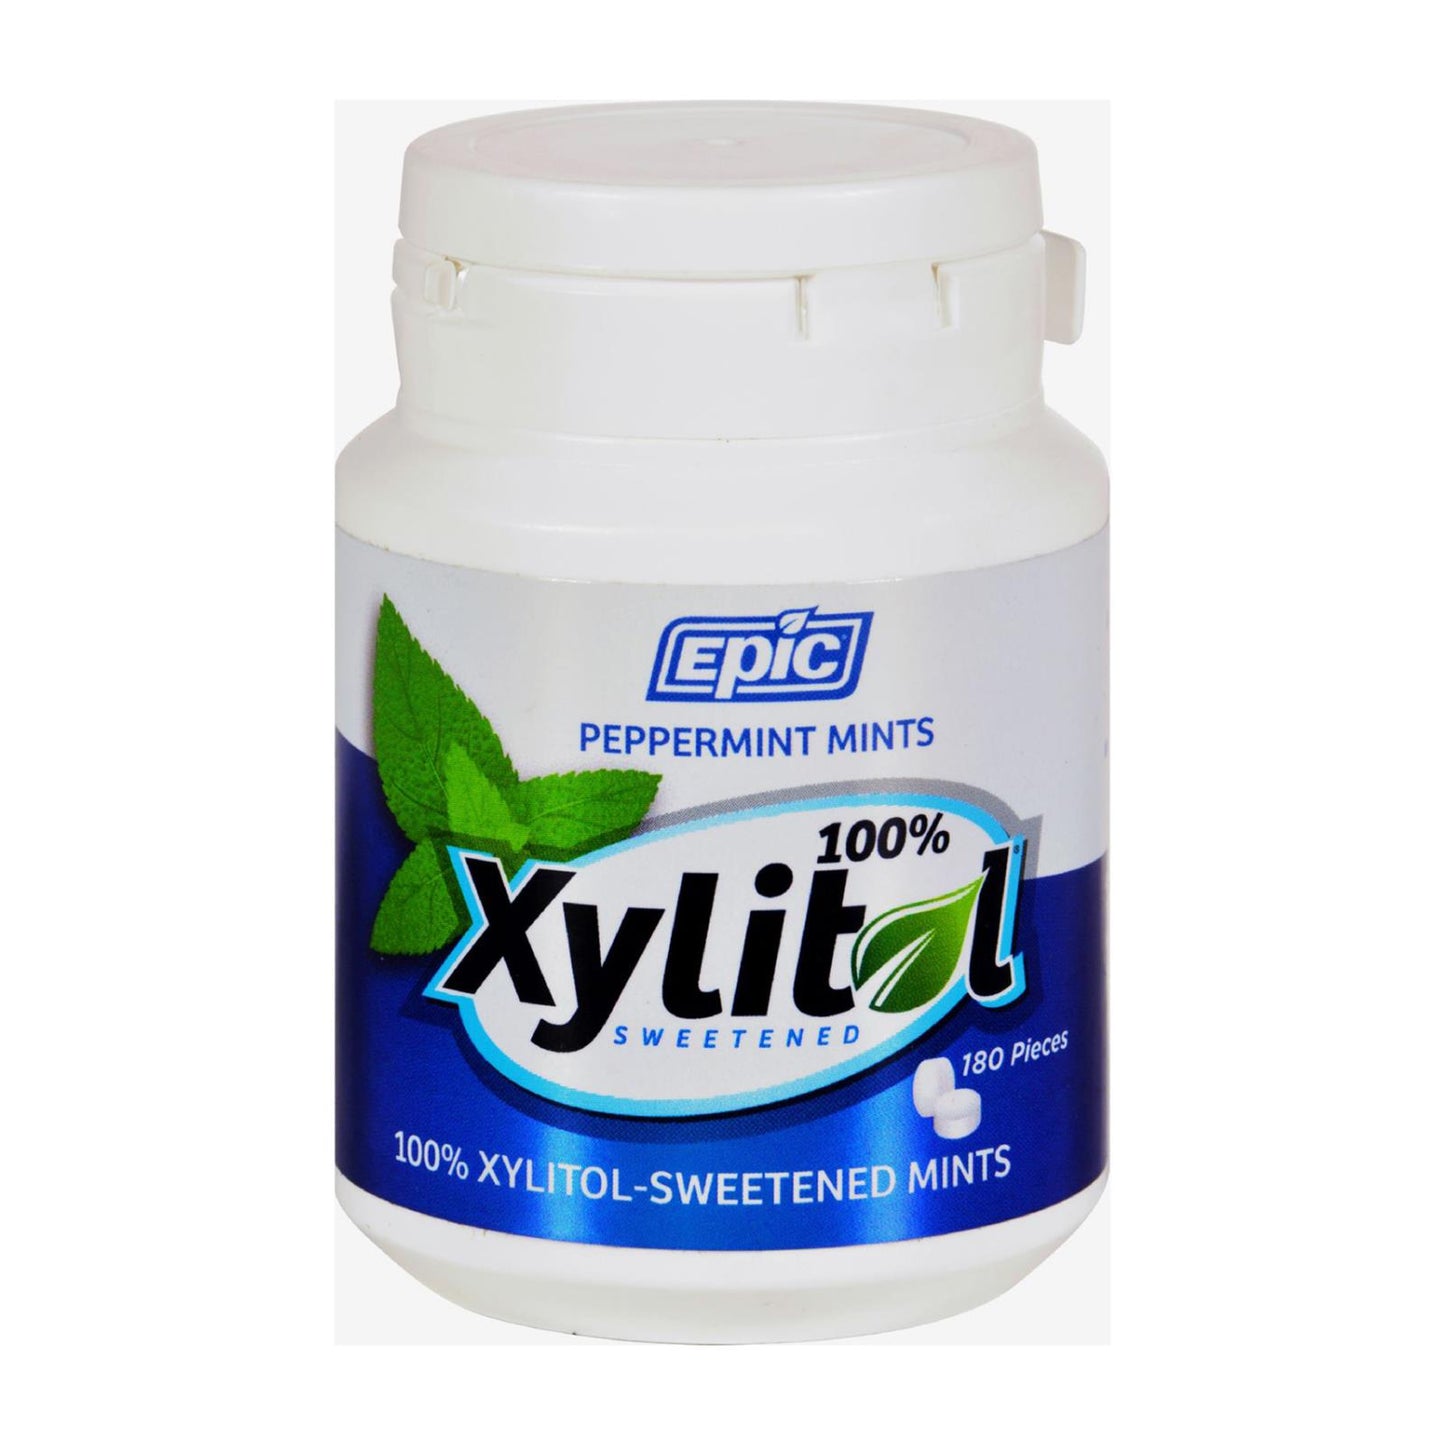 Epic Dental - Xylitol Mints - Peppermint Xylitol Bottle - 180 Ct | OnlyNaturals.us